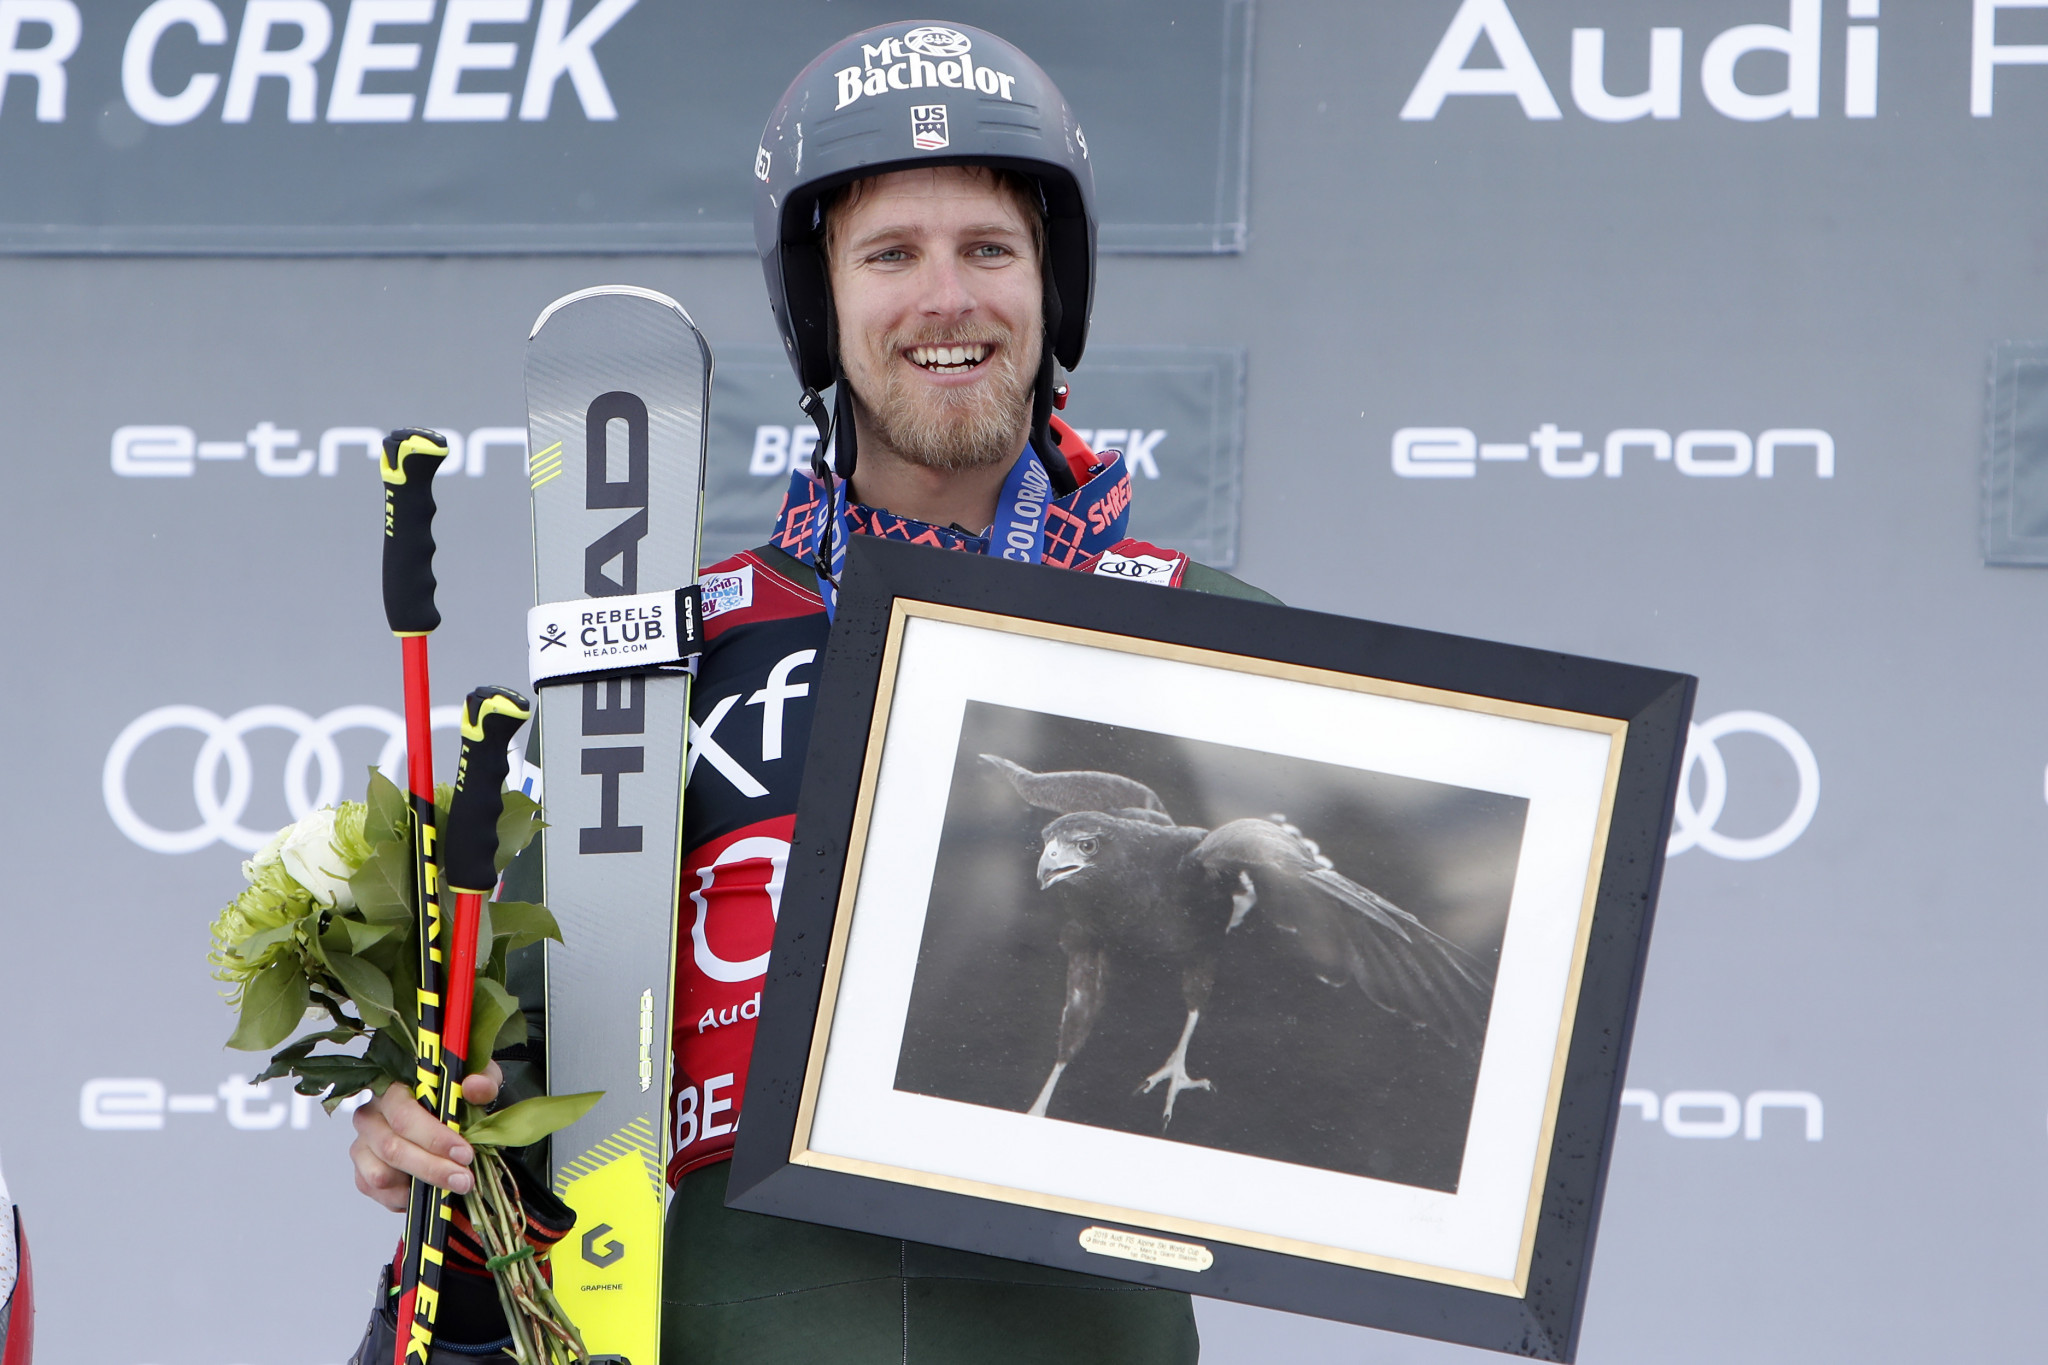 Ford claims first FIS Alpine Skiing World Cup victory in Beaver Creek